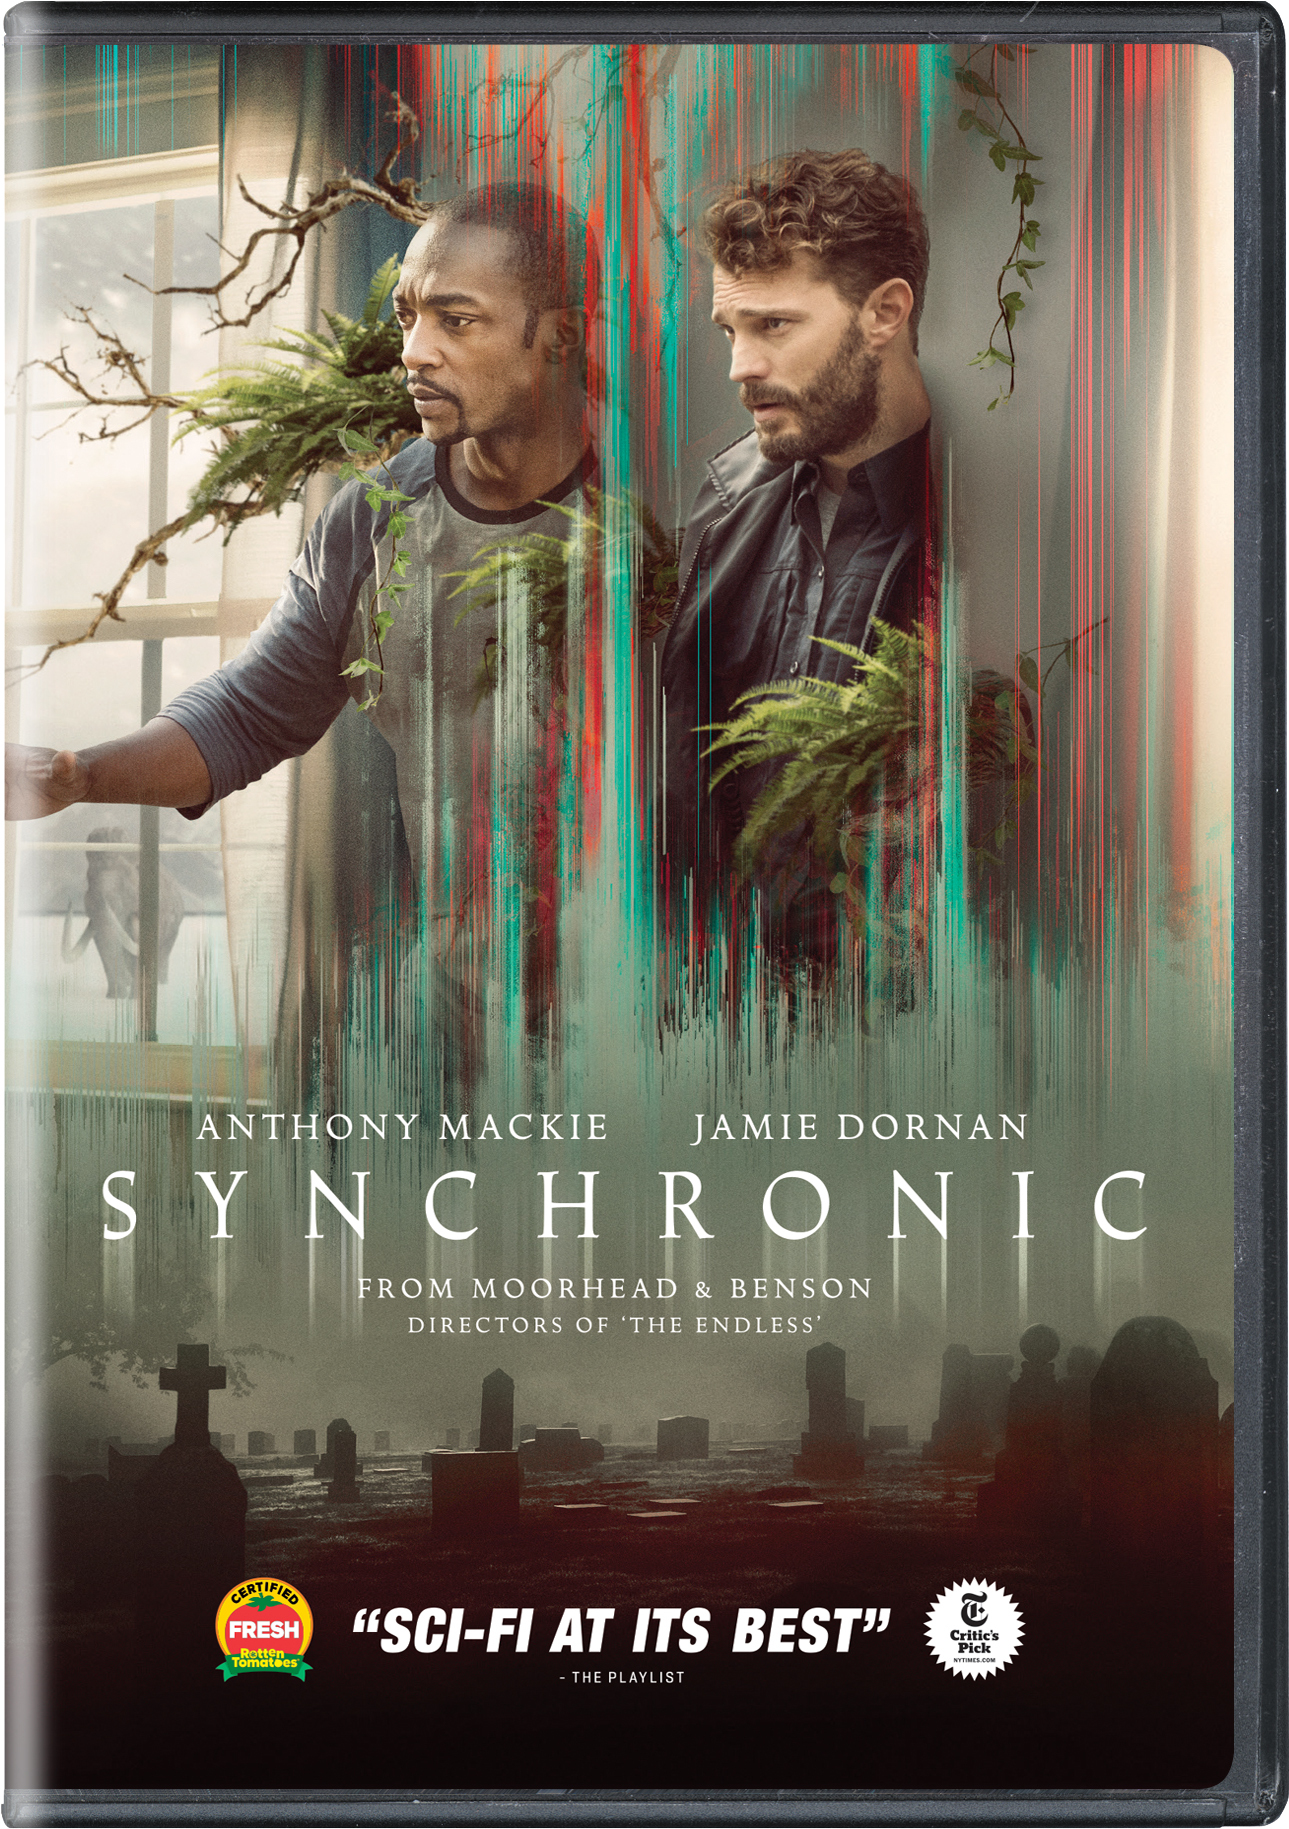 Synchronic - DVD [ 2020 ]  - Sci Fi Movies On DVD - Movies On GRUV